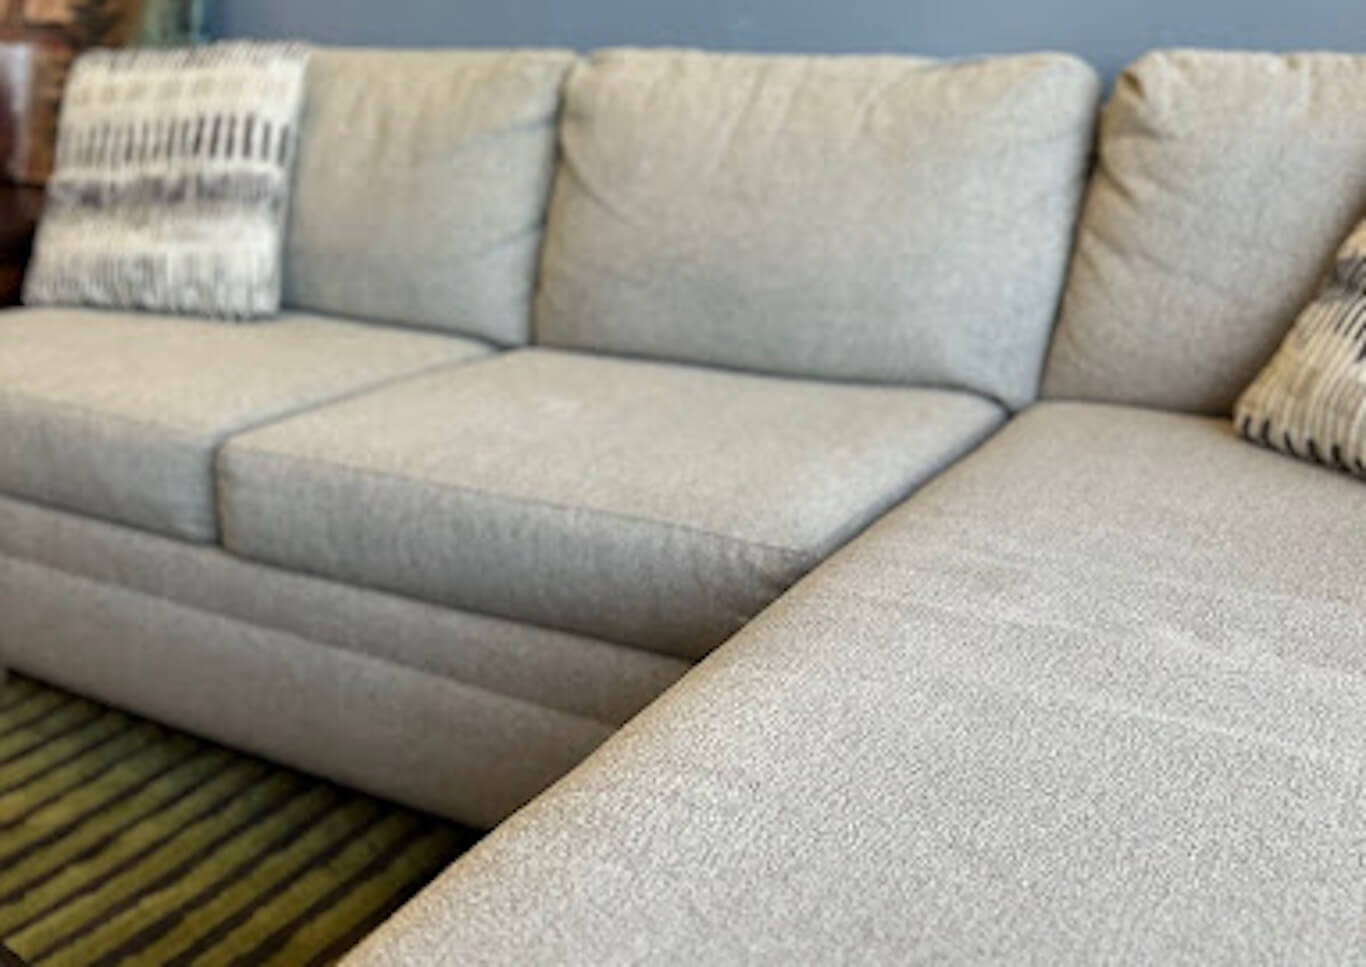 A grey sectional sofa with decorative pillows in a furniture showroom.